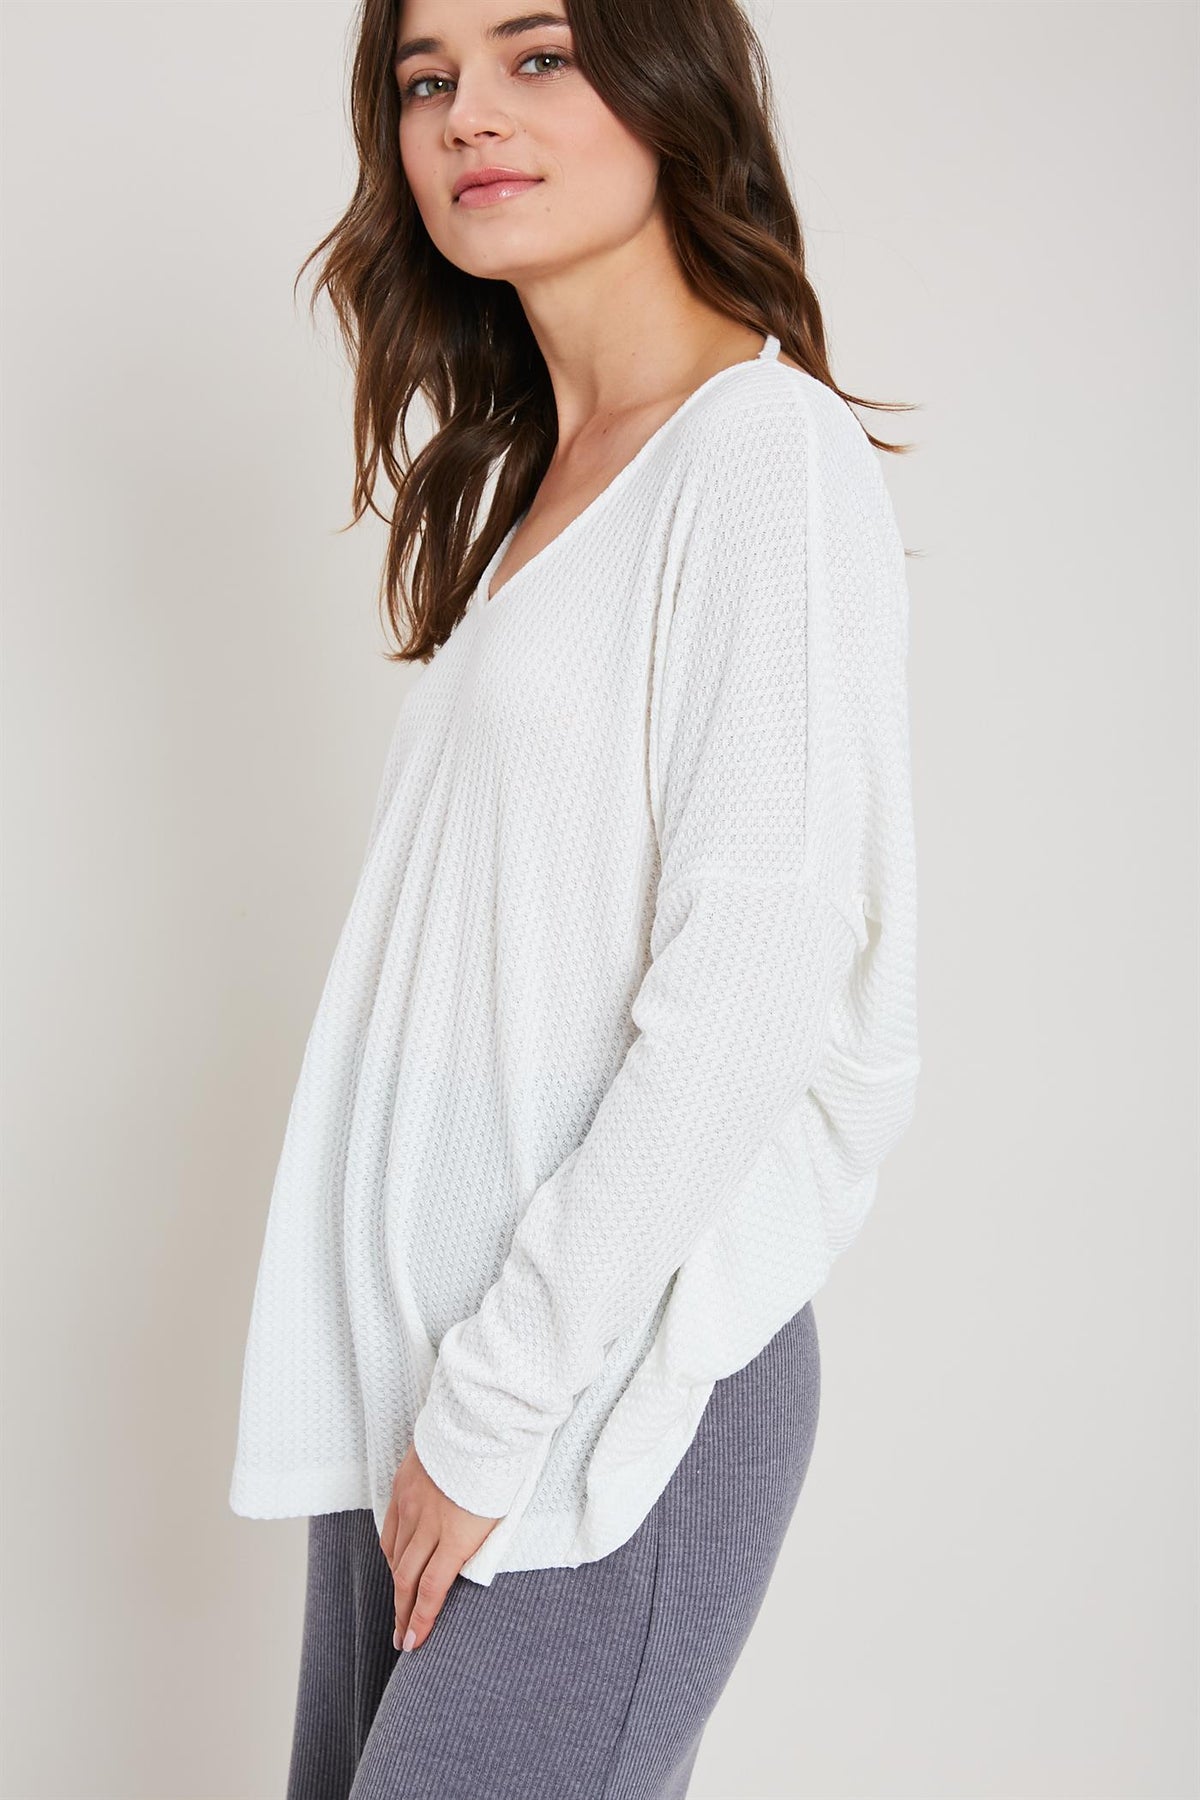 Choose Cozy Waffle Top - Ivory